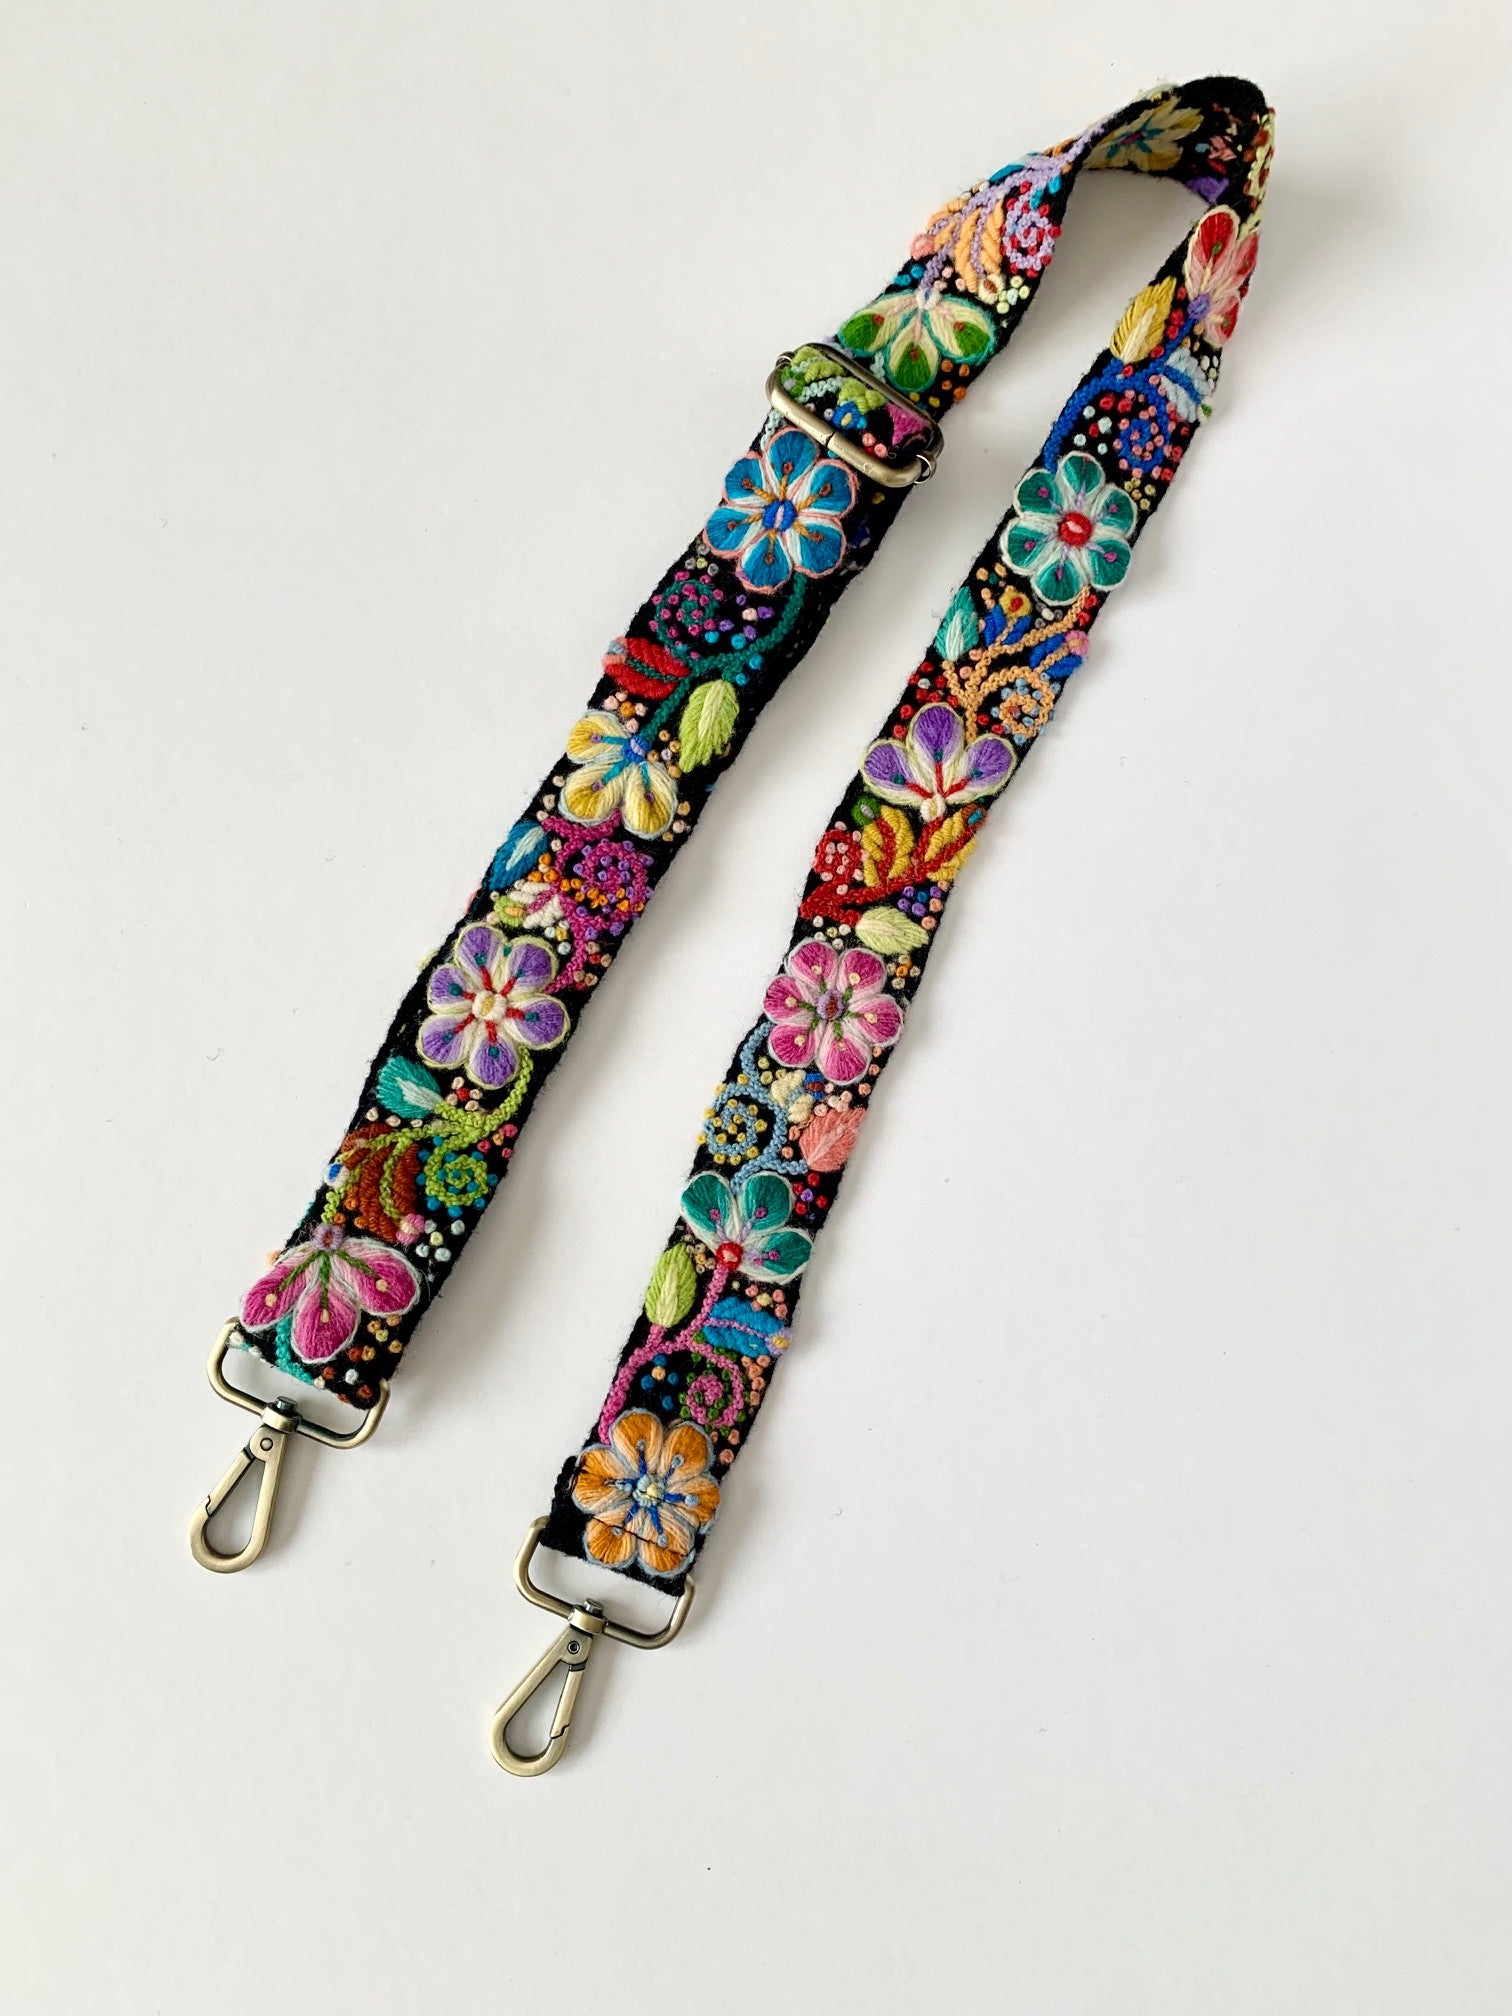 Black Floral Strap with colorful hand embroidery and unique design, produced by Fair Trade artisans in Peru.